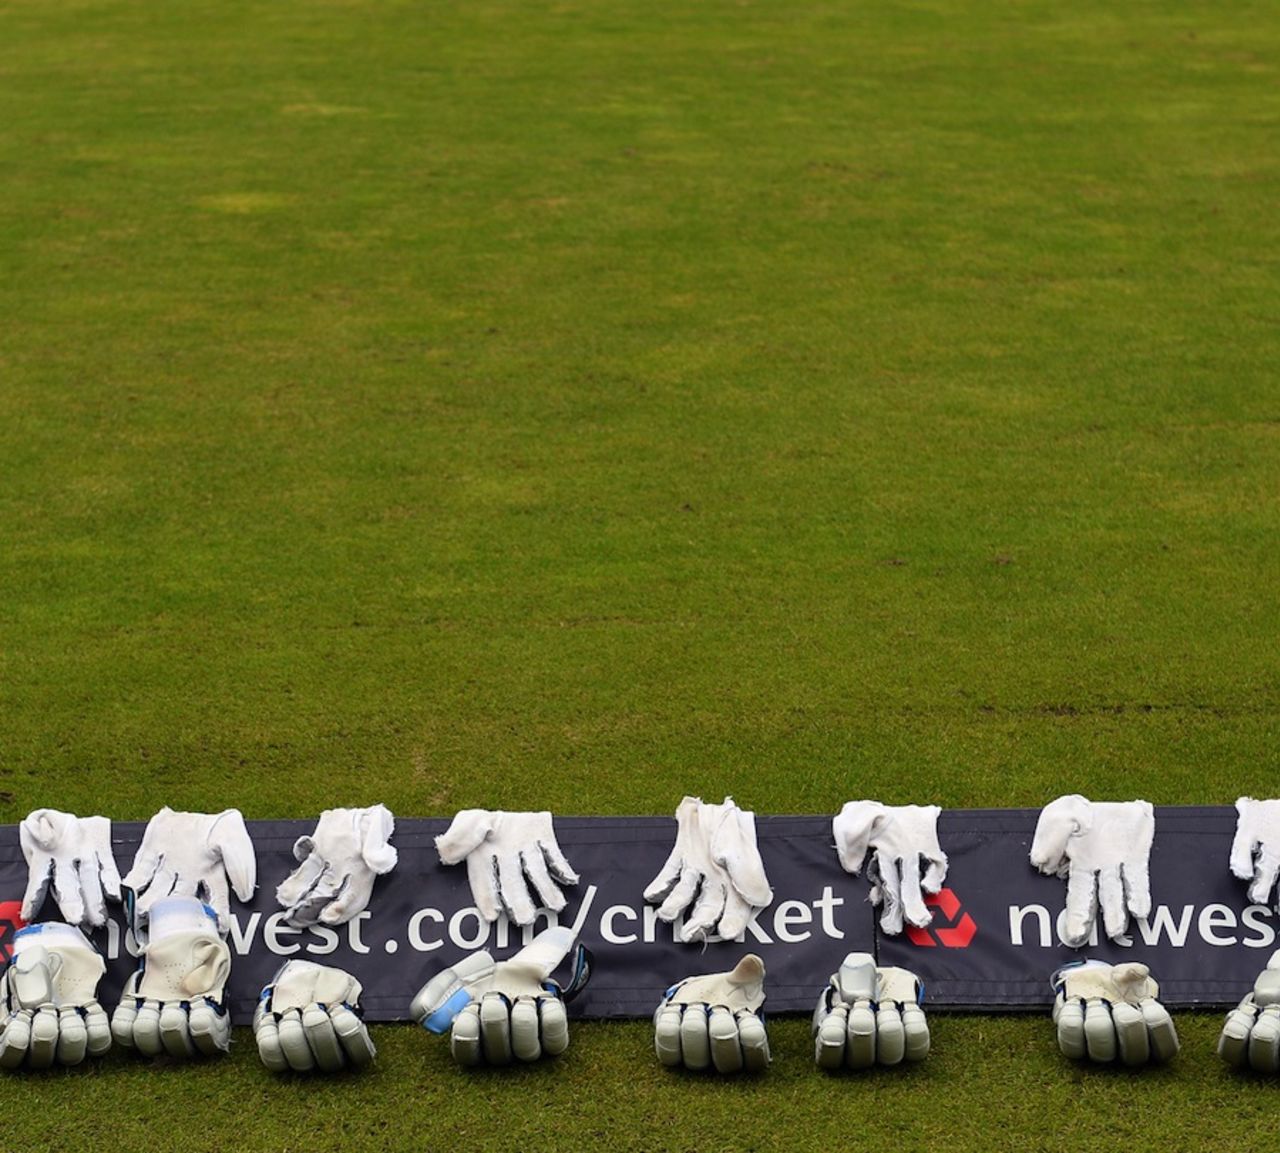 Rows of batting gloves left to dry at the boundary, England v Australia, 2nd NatWest ODI, Old Trafford, September 8, 2013